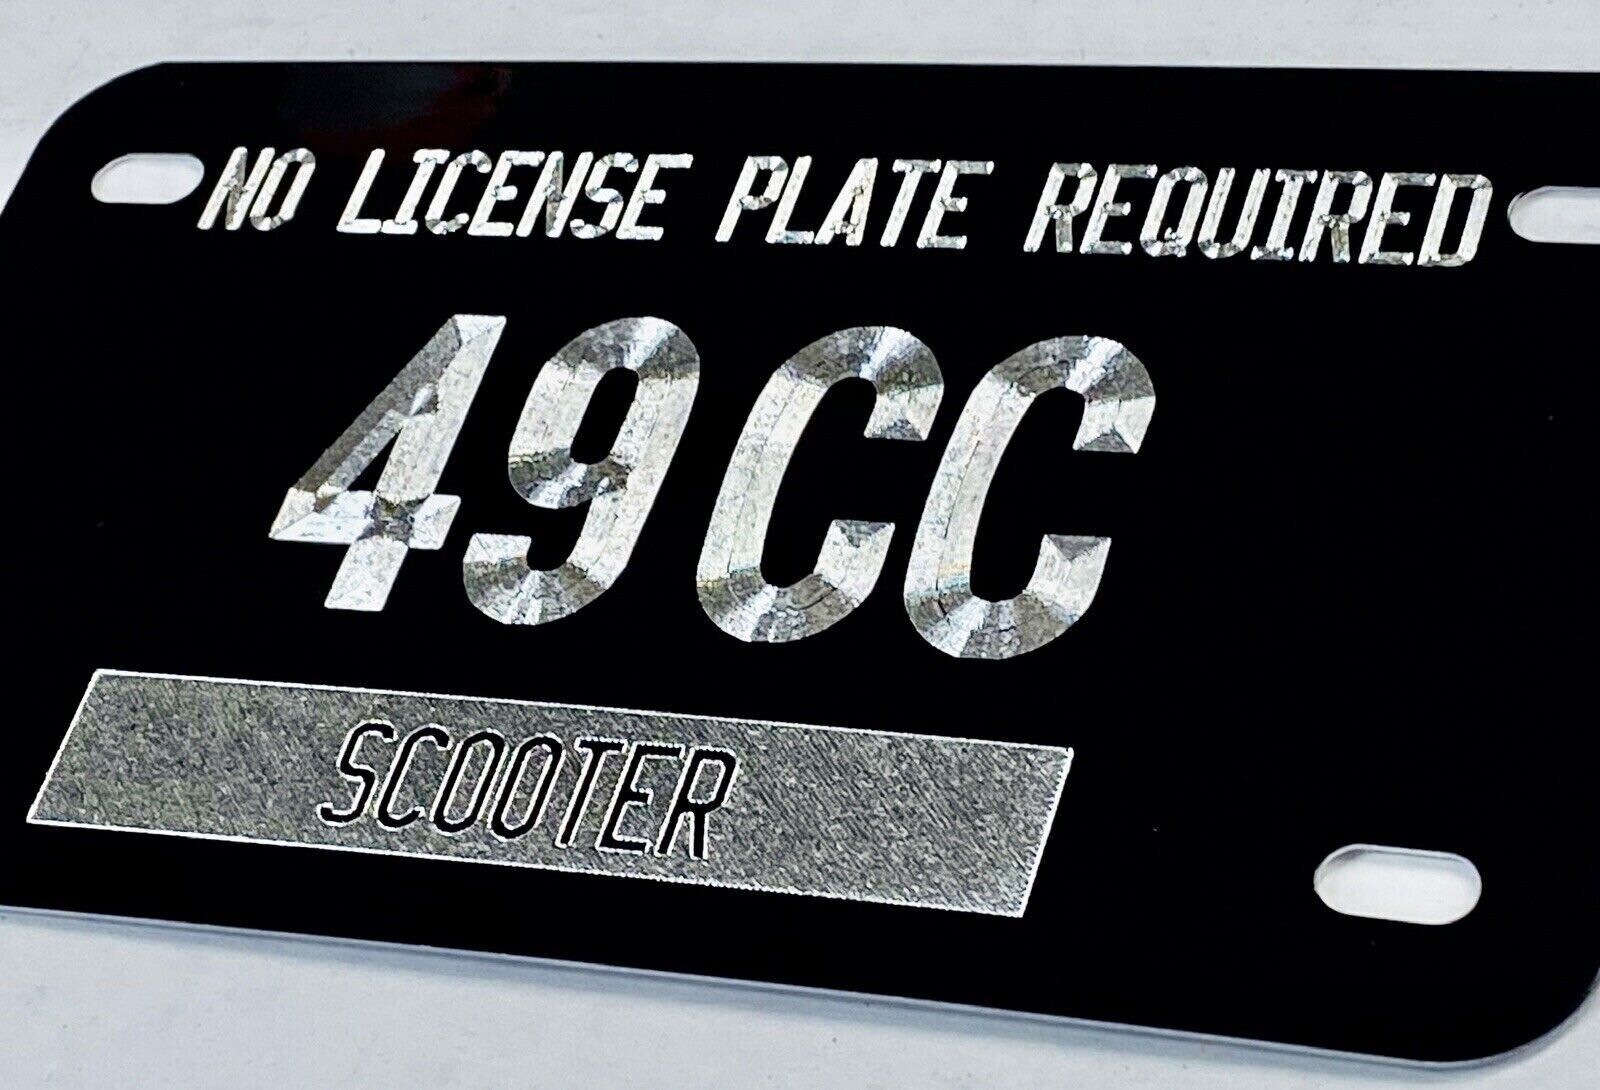 Scooter Tag No License Plate Required 49cc 49 CC Diamond Etched Metal 7x4 Tag